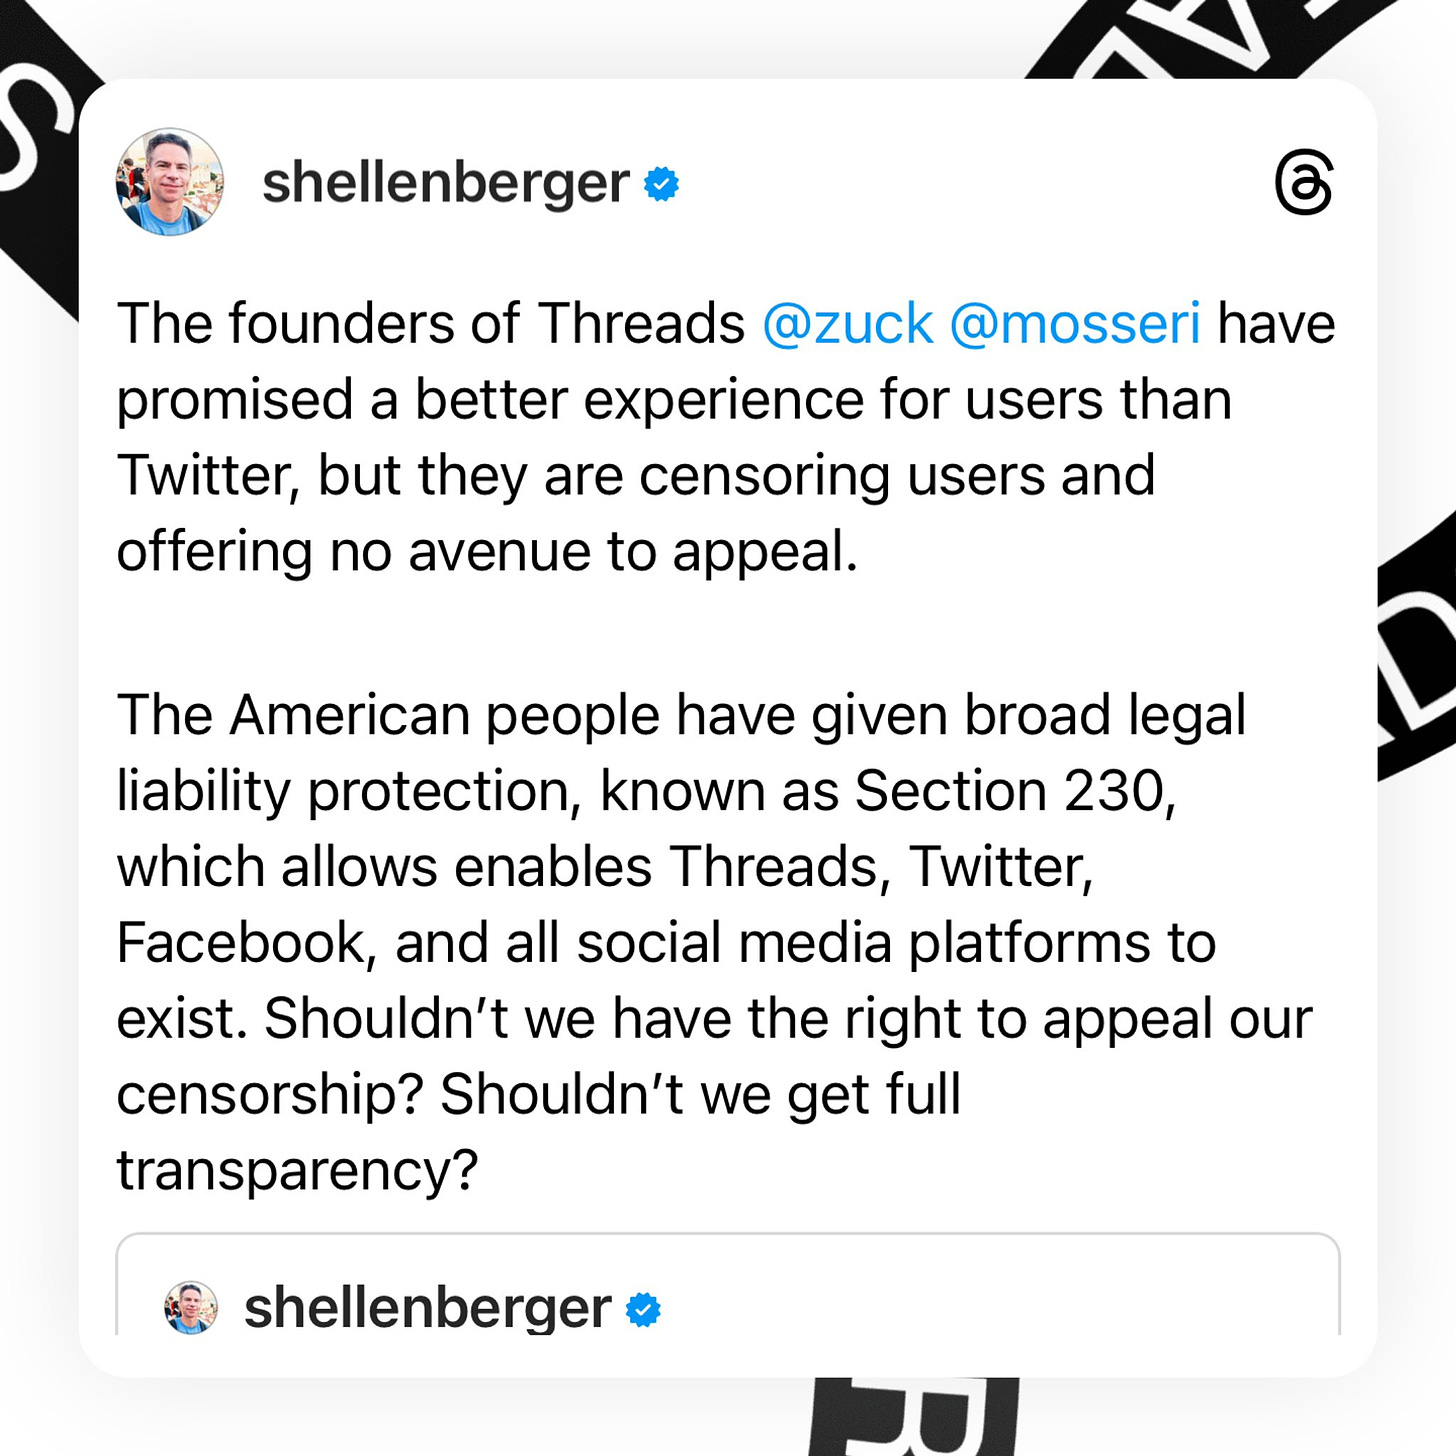 Michael Shellenberger on Twitter: "Mark Zuckerberg, the founder of Meta's  new app, Threads, has promised users a better experience than Twitter, but  he is censoring users and offering no avenue for appeal.